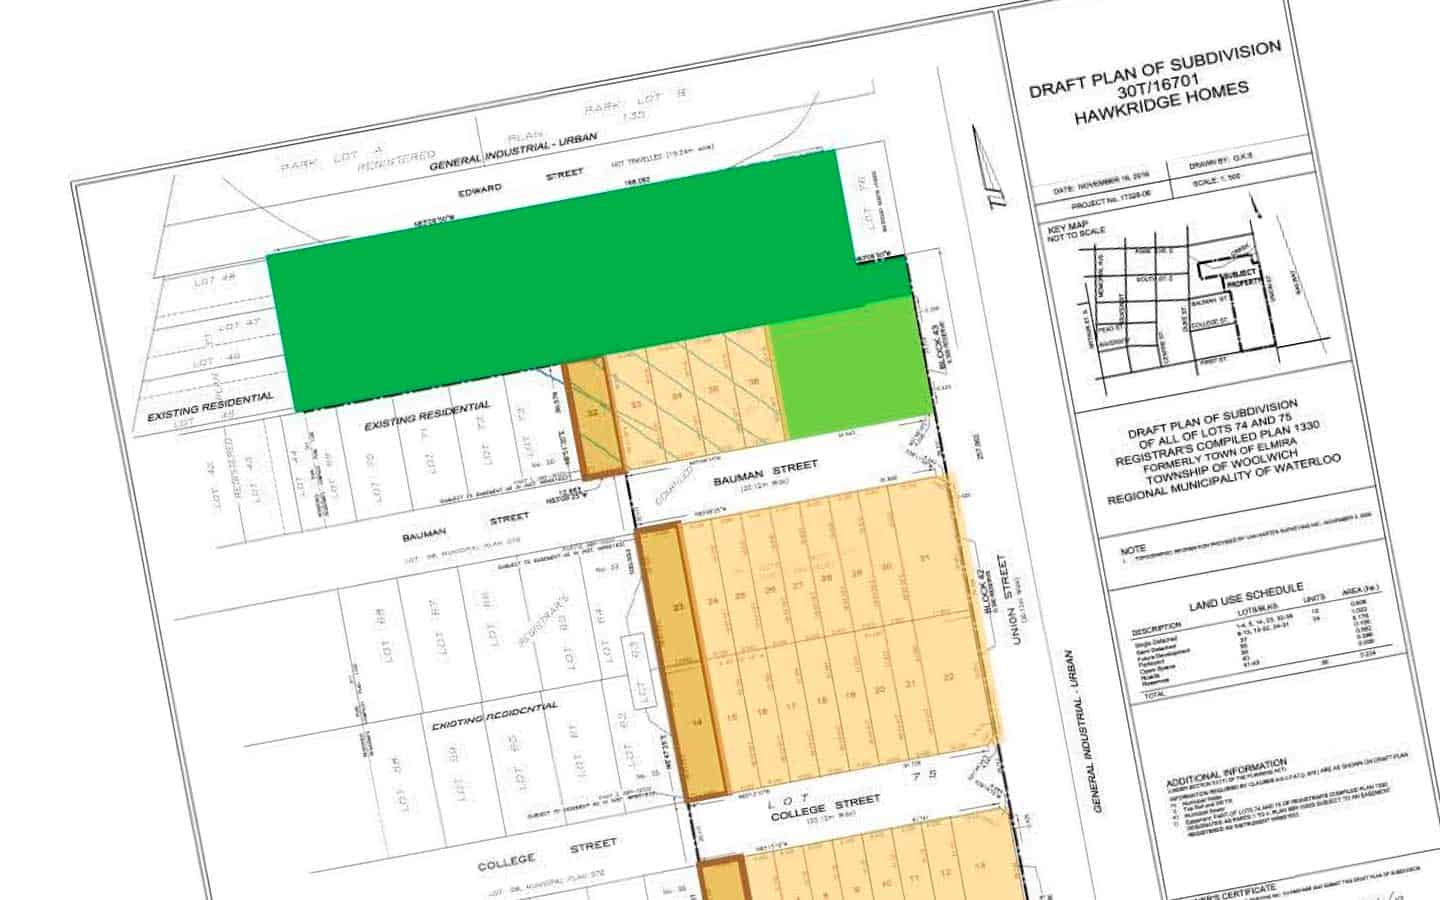 Developer makes another pitch for subdivision near industrial area